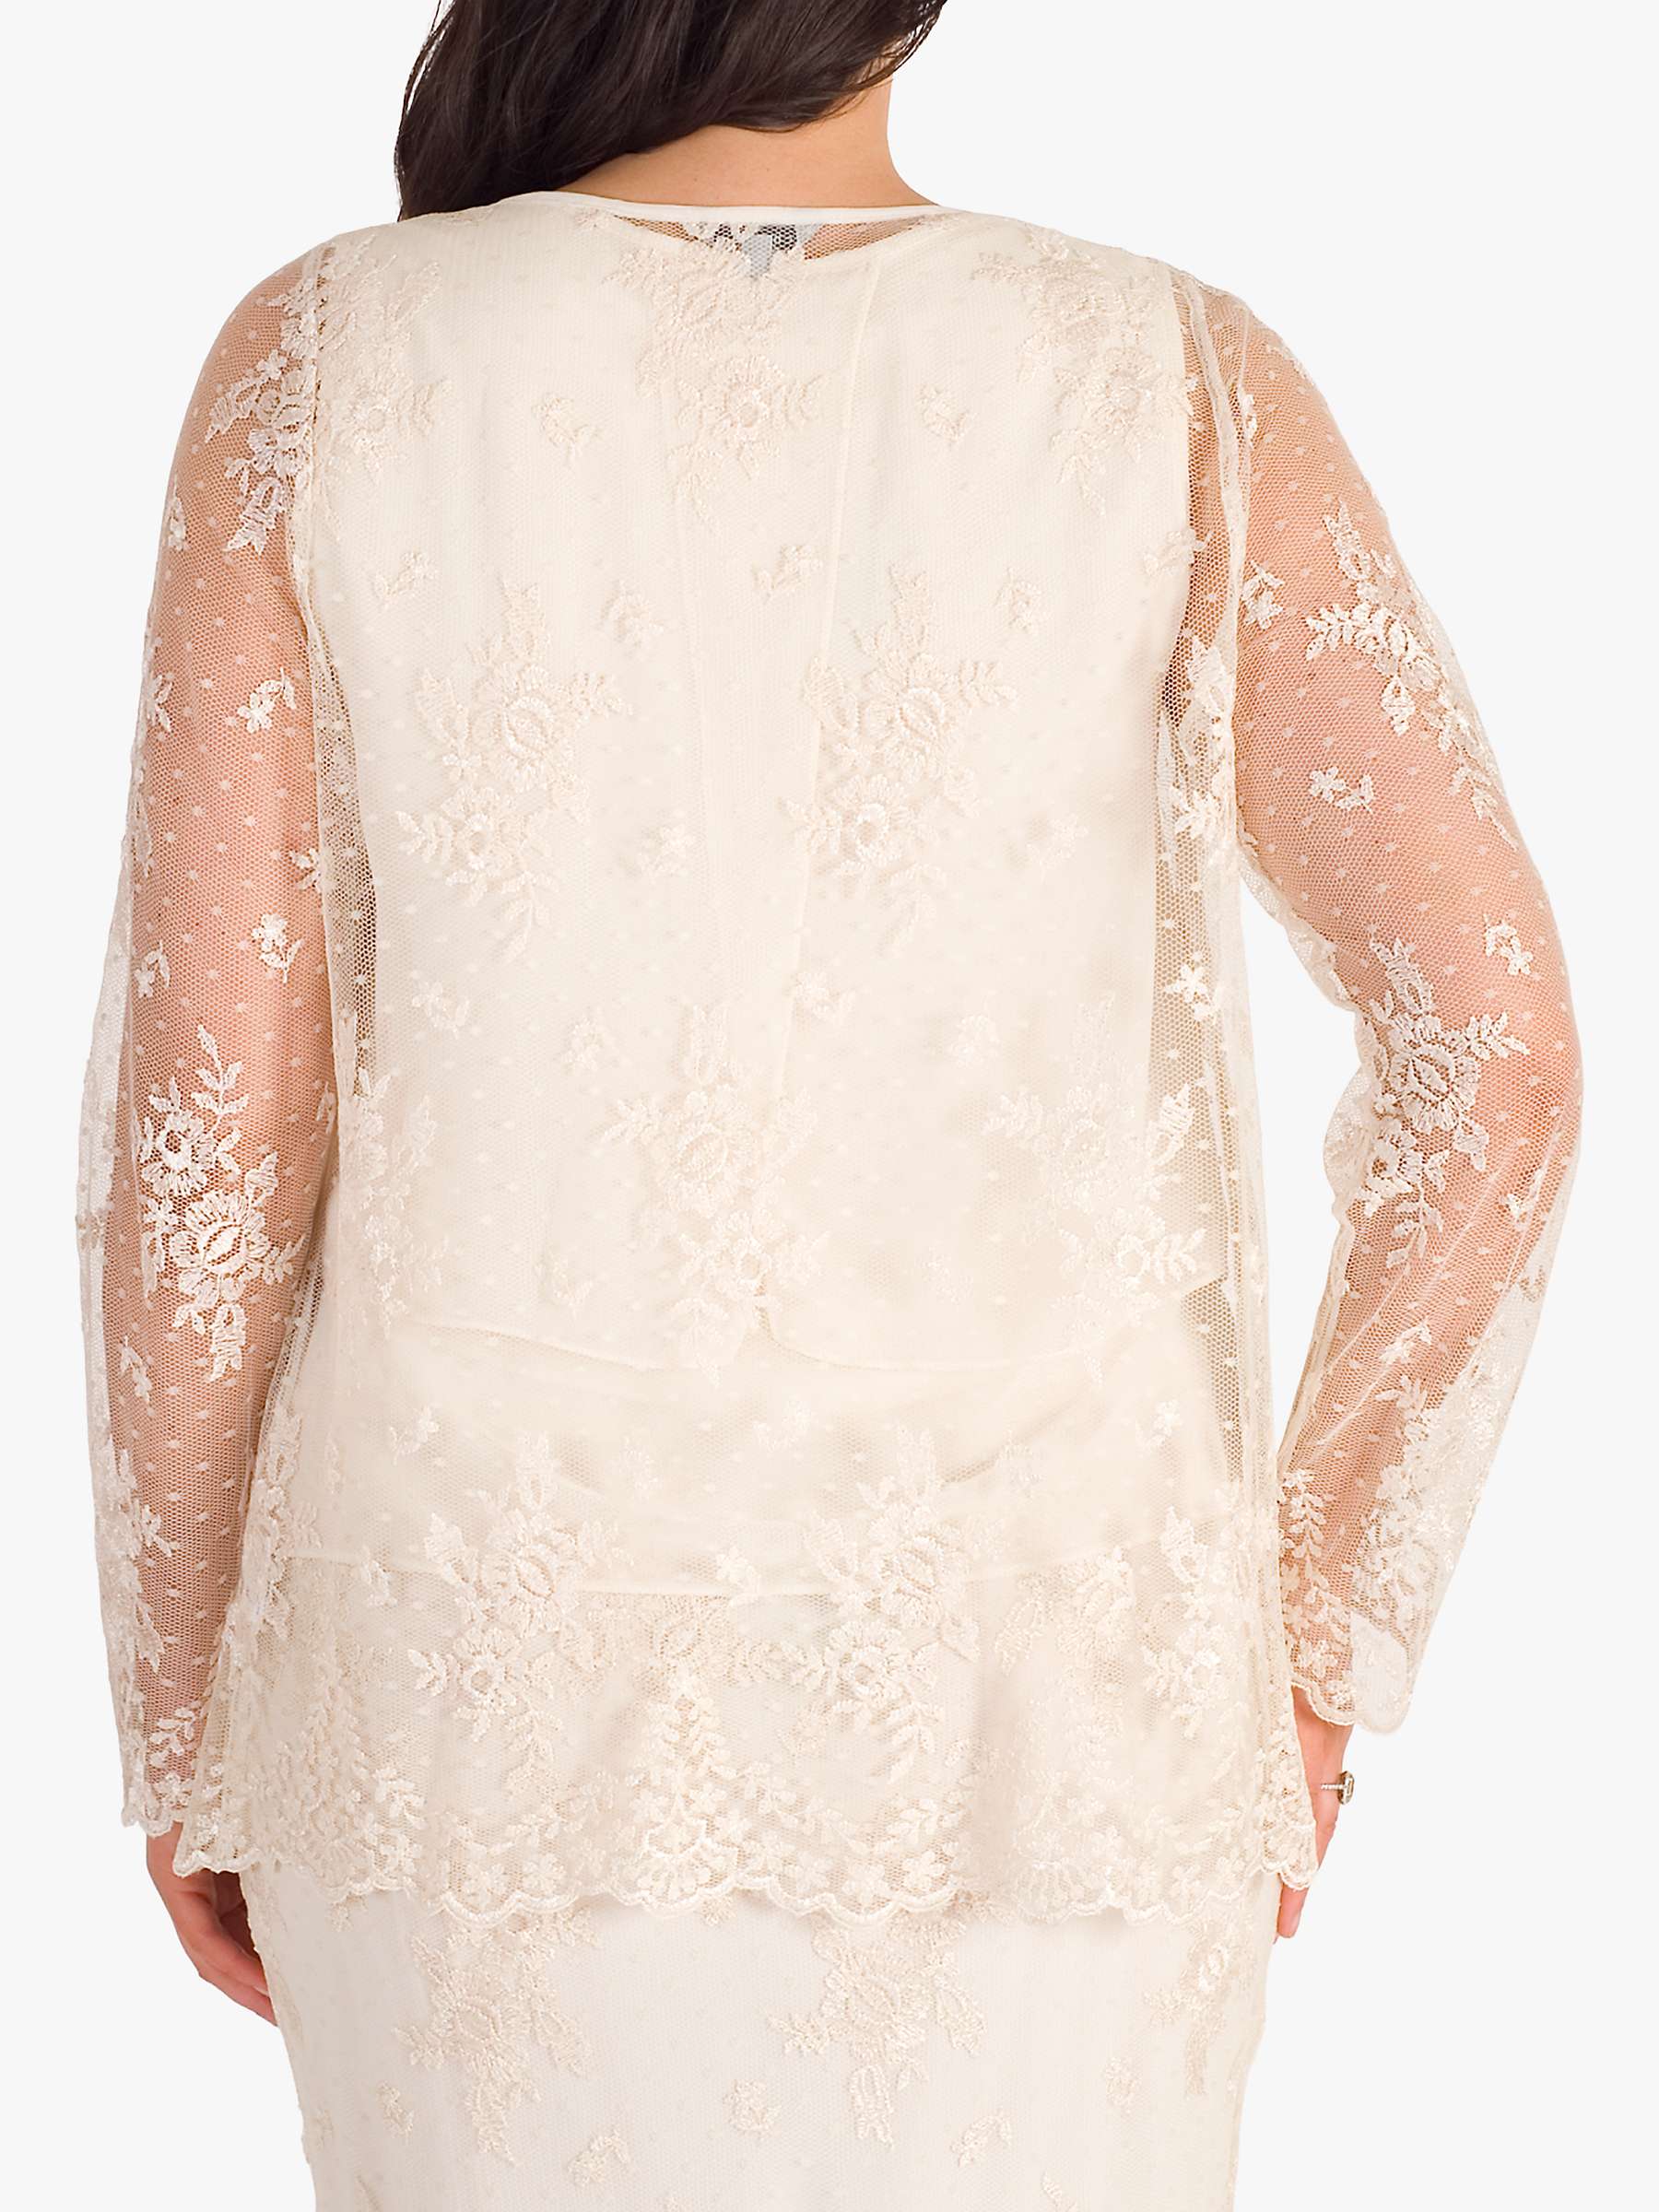 Buy Chesca Embroidered Mesh Jacket, Cream Online at johnlewis.com